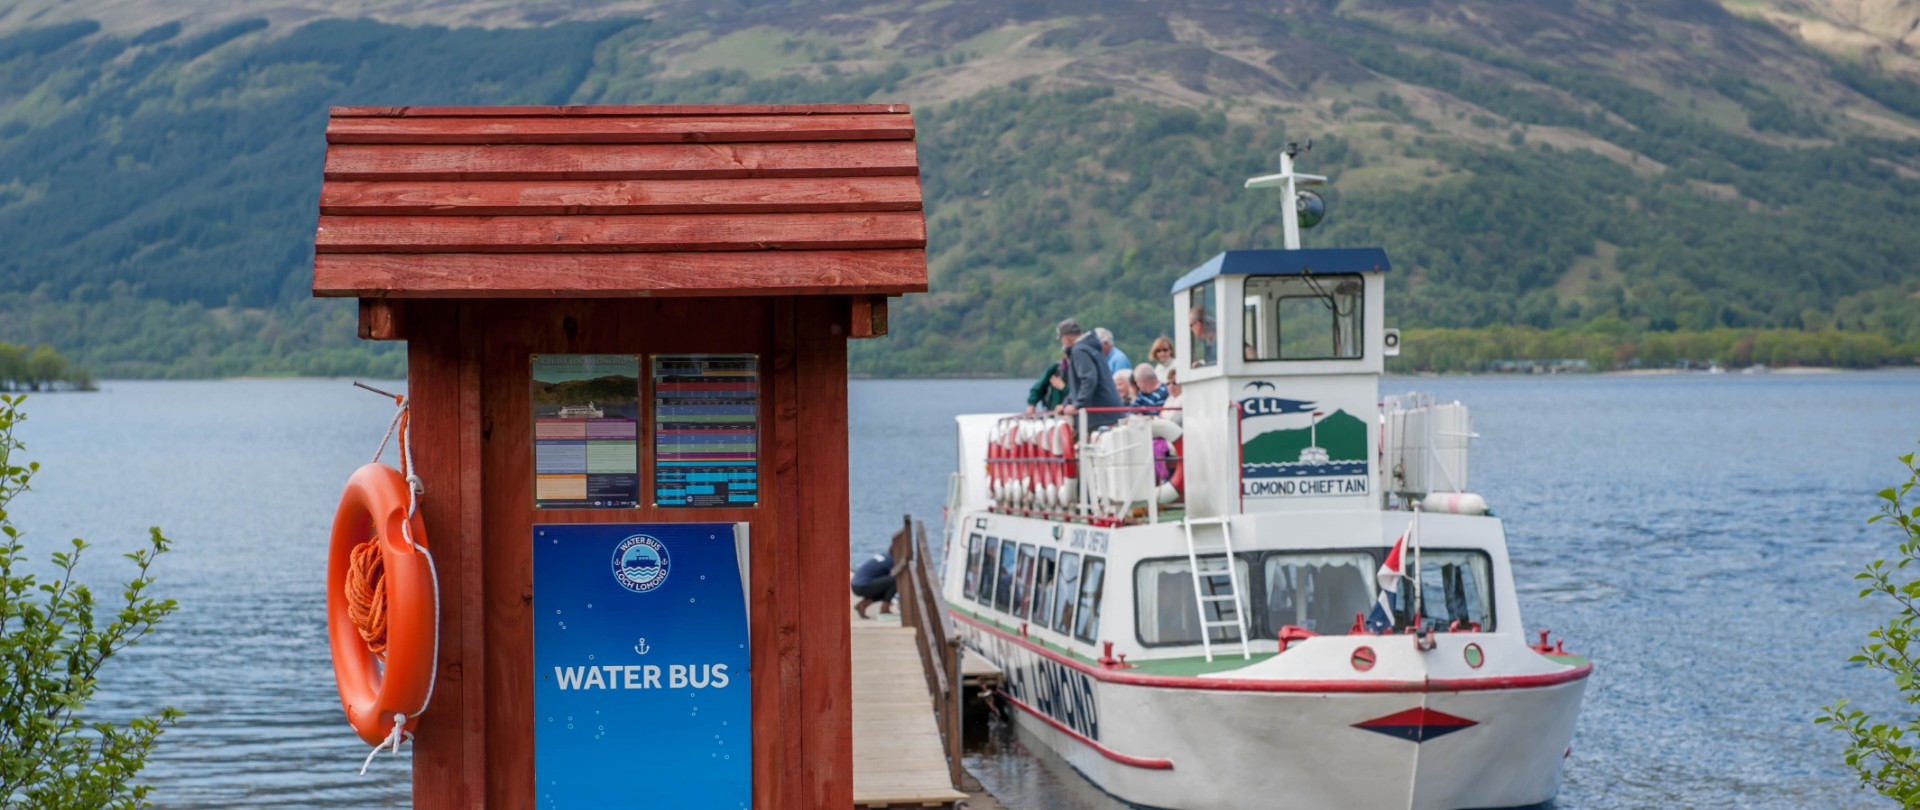 boat and ticket hut